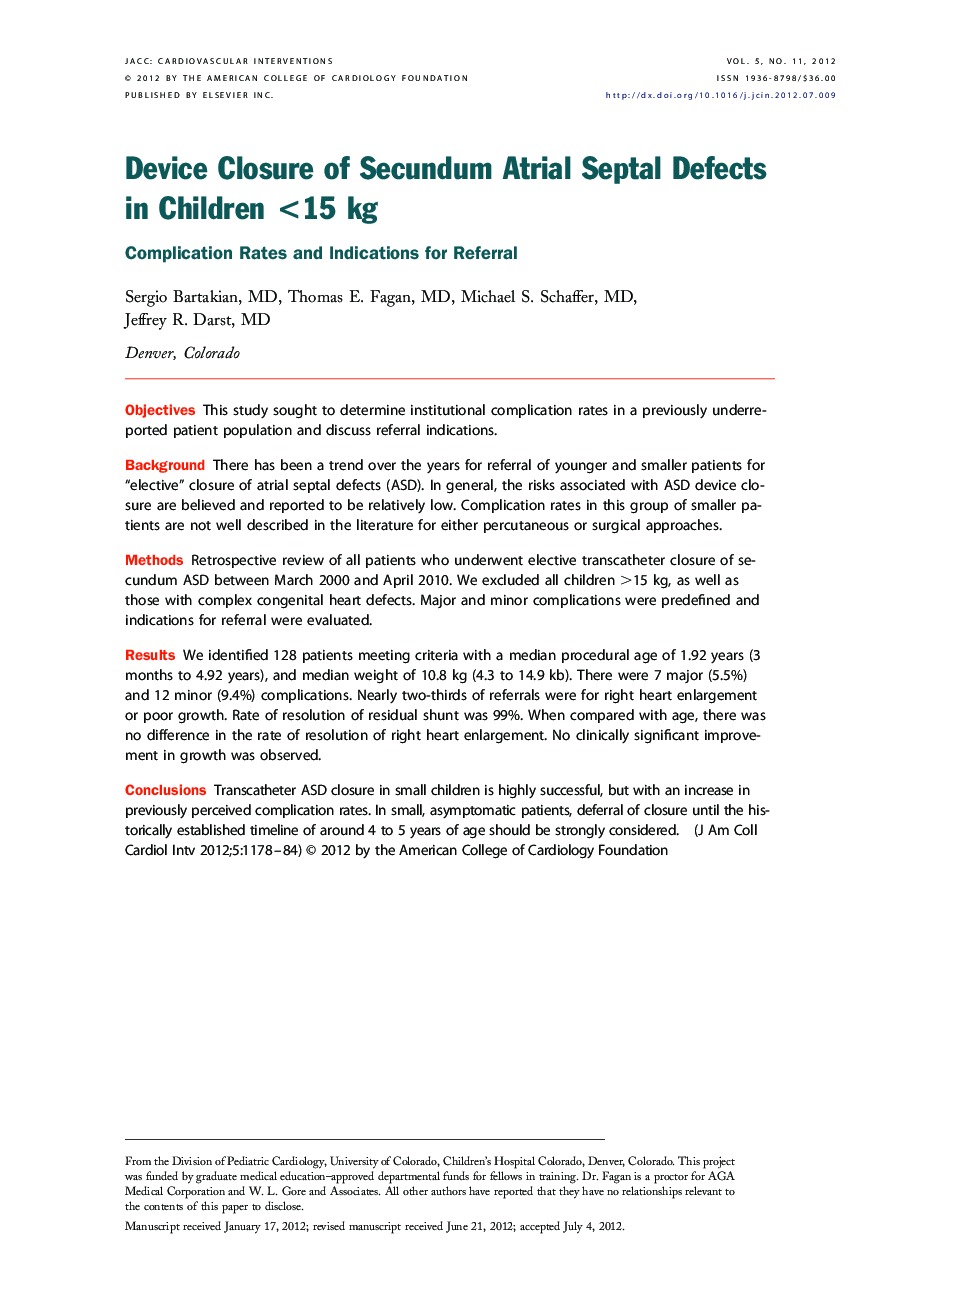 Device Closure of Secundum Atrial Septal Defects in Children <15 kg : Complication Rates and Indications for Referral